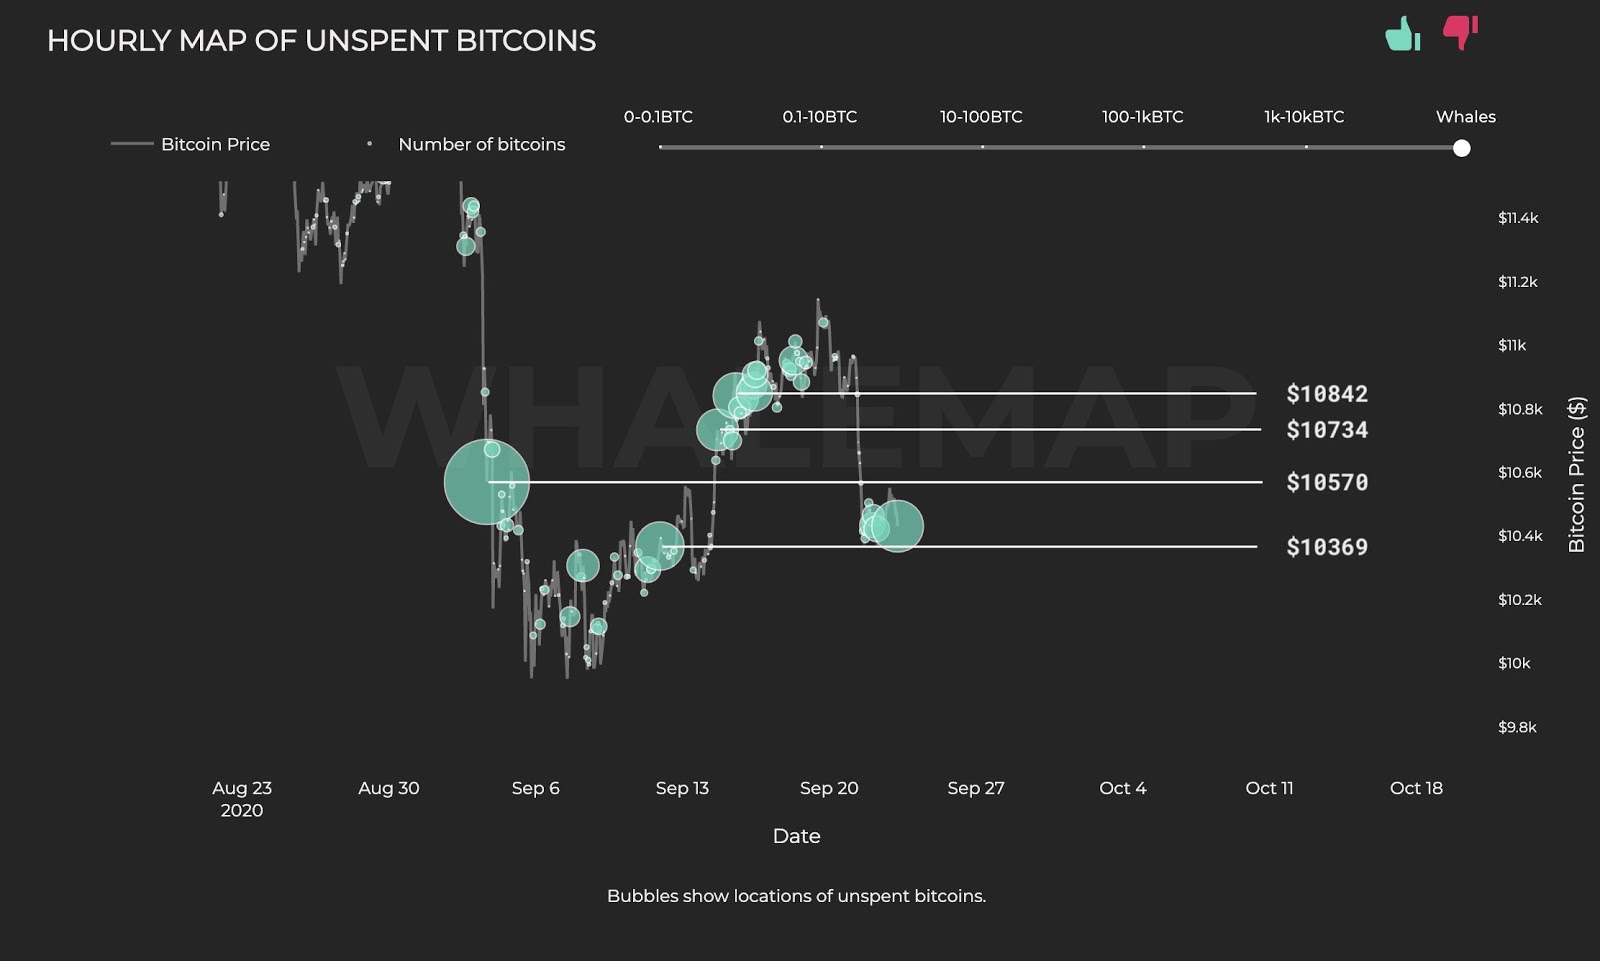 The hourly map of unspent Bitcoin from whales